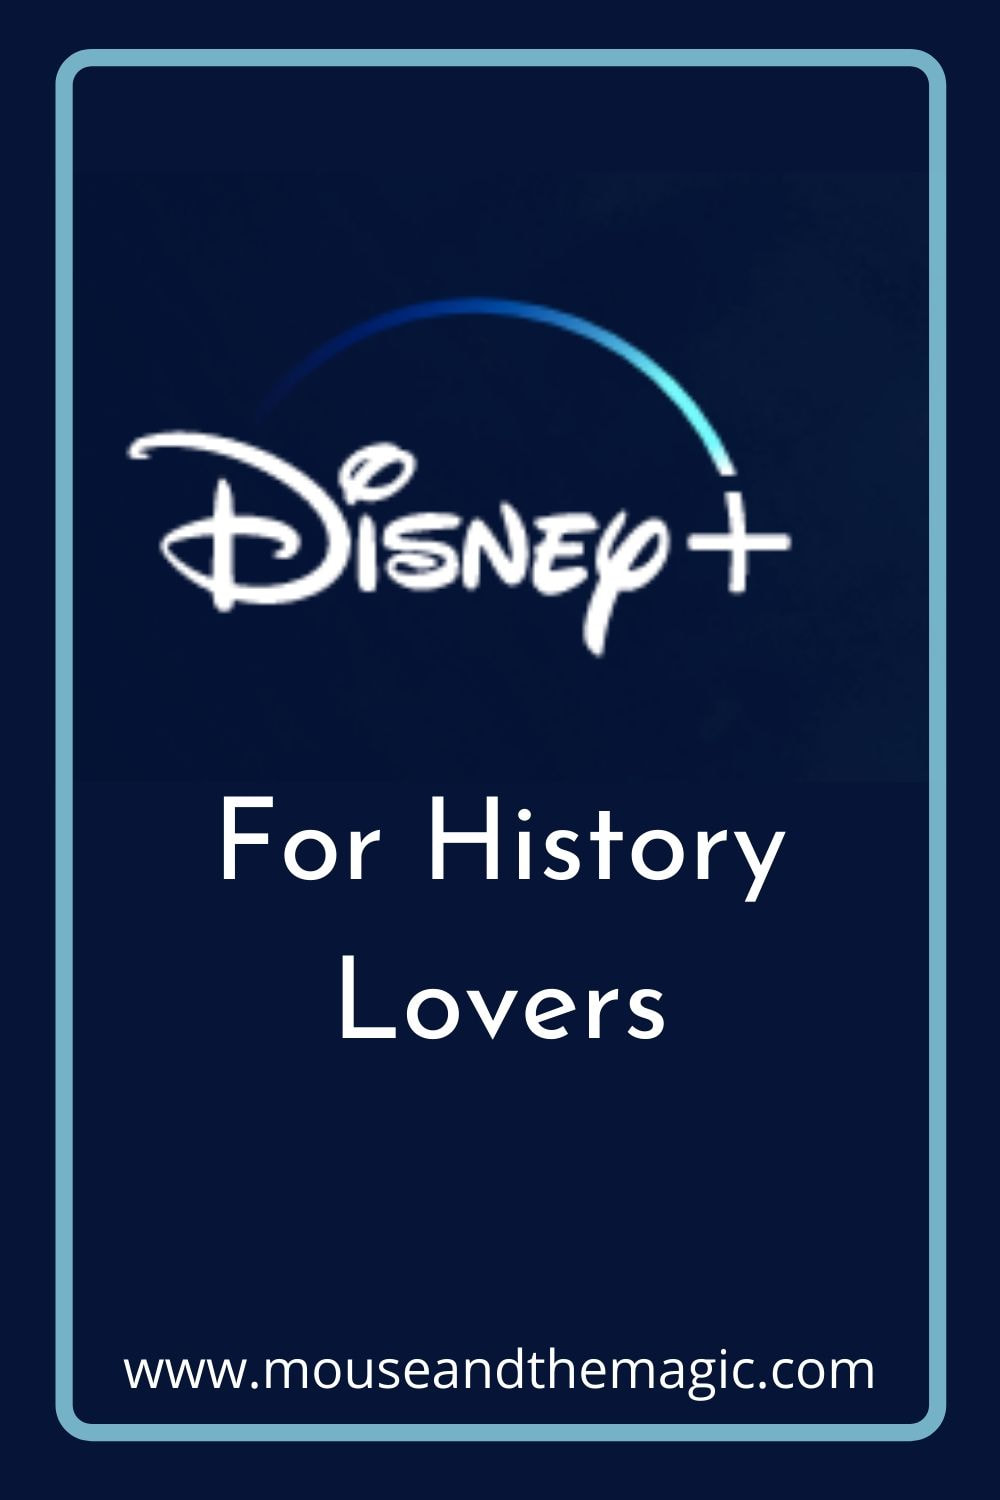 Disney + for History Lovers